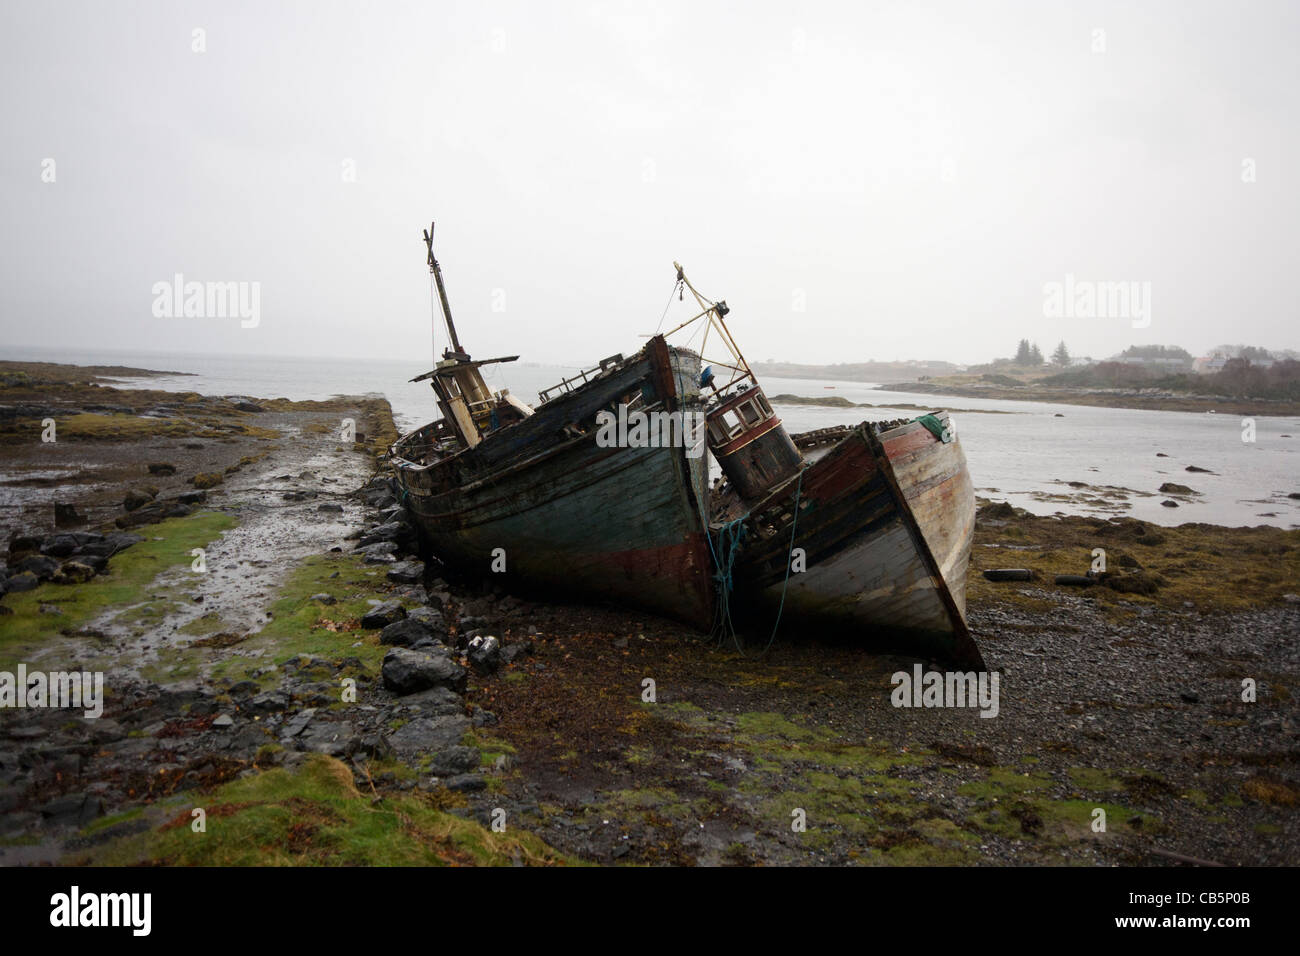 Wrecked fishing boats beached on shore at Salen, Isle of Mull. Stock Photo